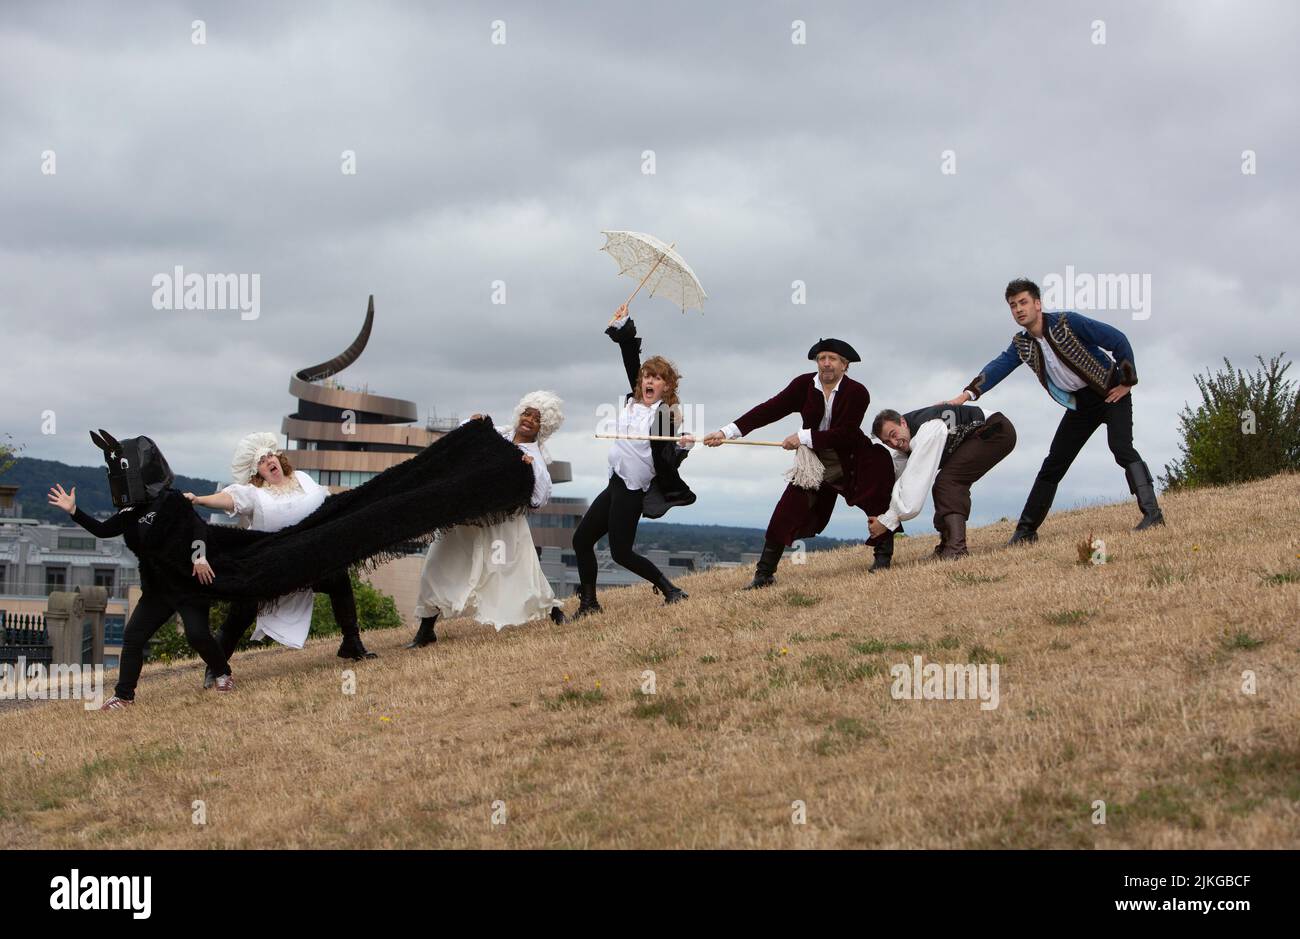 Edinburgh. Scotland. UK. 2nd August 2022. Photocall: Literary closing and slapstick on Calton Hill. The Fringe the six actors from the brilliantly fast paced slapstick romp Classic! (daily 3- 29 August Pleasance 1) will wear a smorgasbord of 17th, 18th, and 19th century costumes (think wigs, parasols, long velvet, military jackets and jolly jack tars). With props including trumpets, parasols, a pantomime horse, very unperiod water pistols and a bright pink melodica). They will be clowning and posing with the city behind them and on The National Monument of Scotland. Pic: Pako Mera/Alamy Li Stock Photo